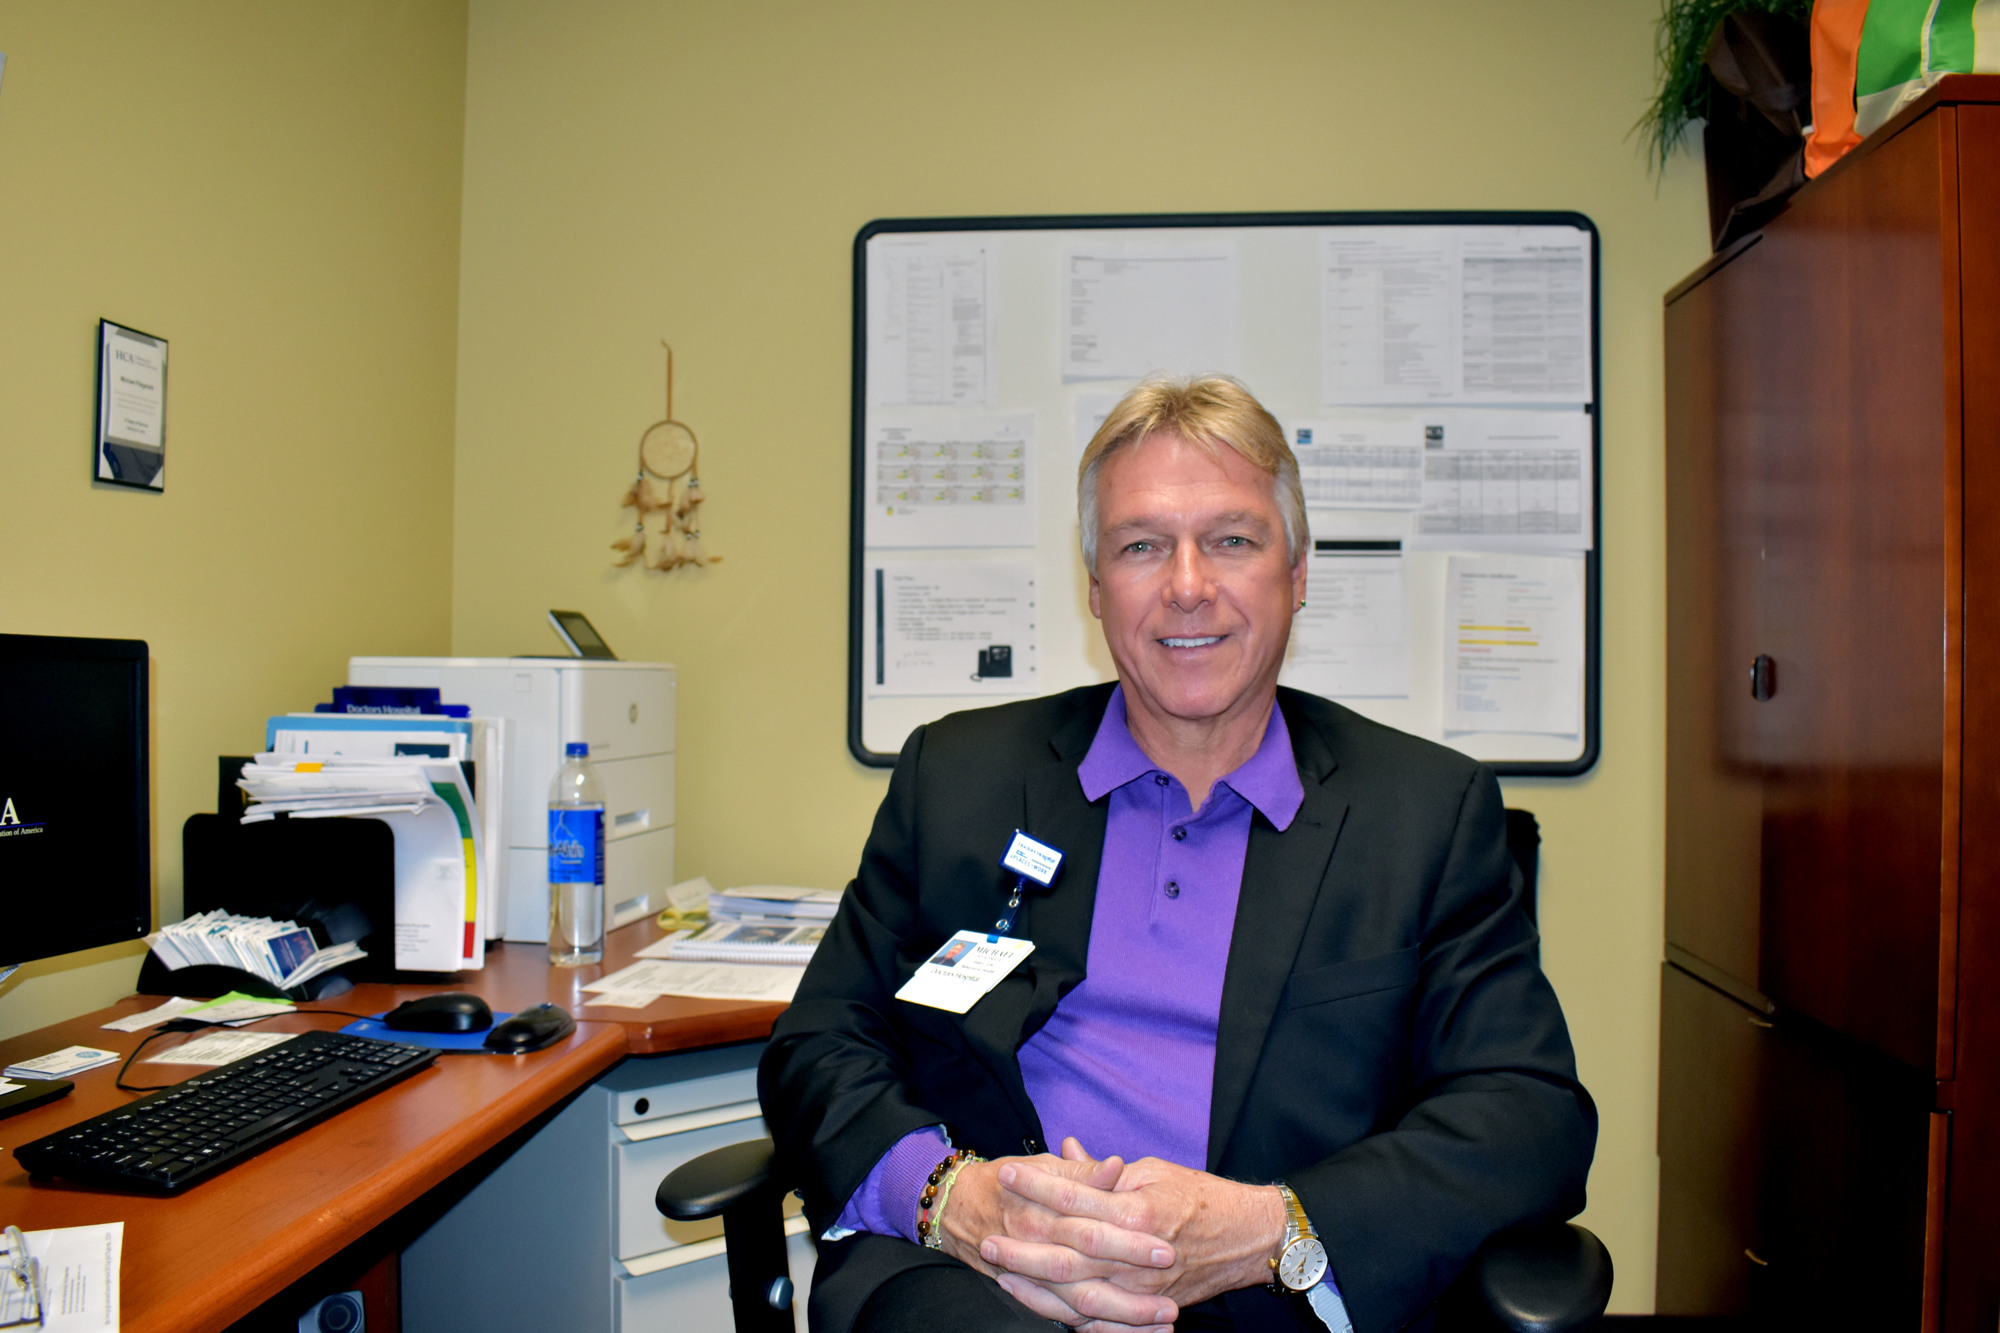 Michael Fitzgerald, director of behavioral health at Serenity Place, works with caregivers daily.